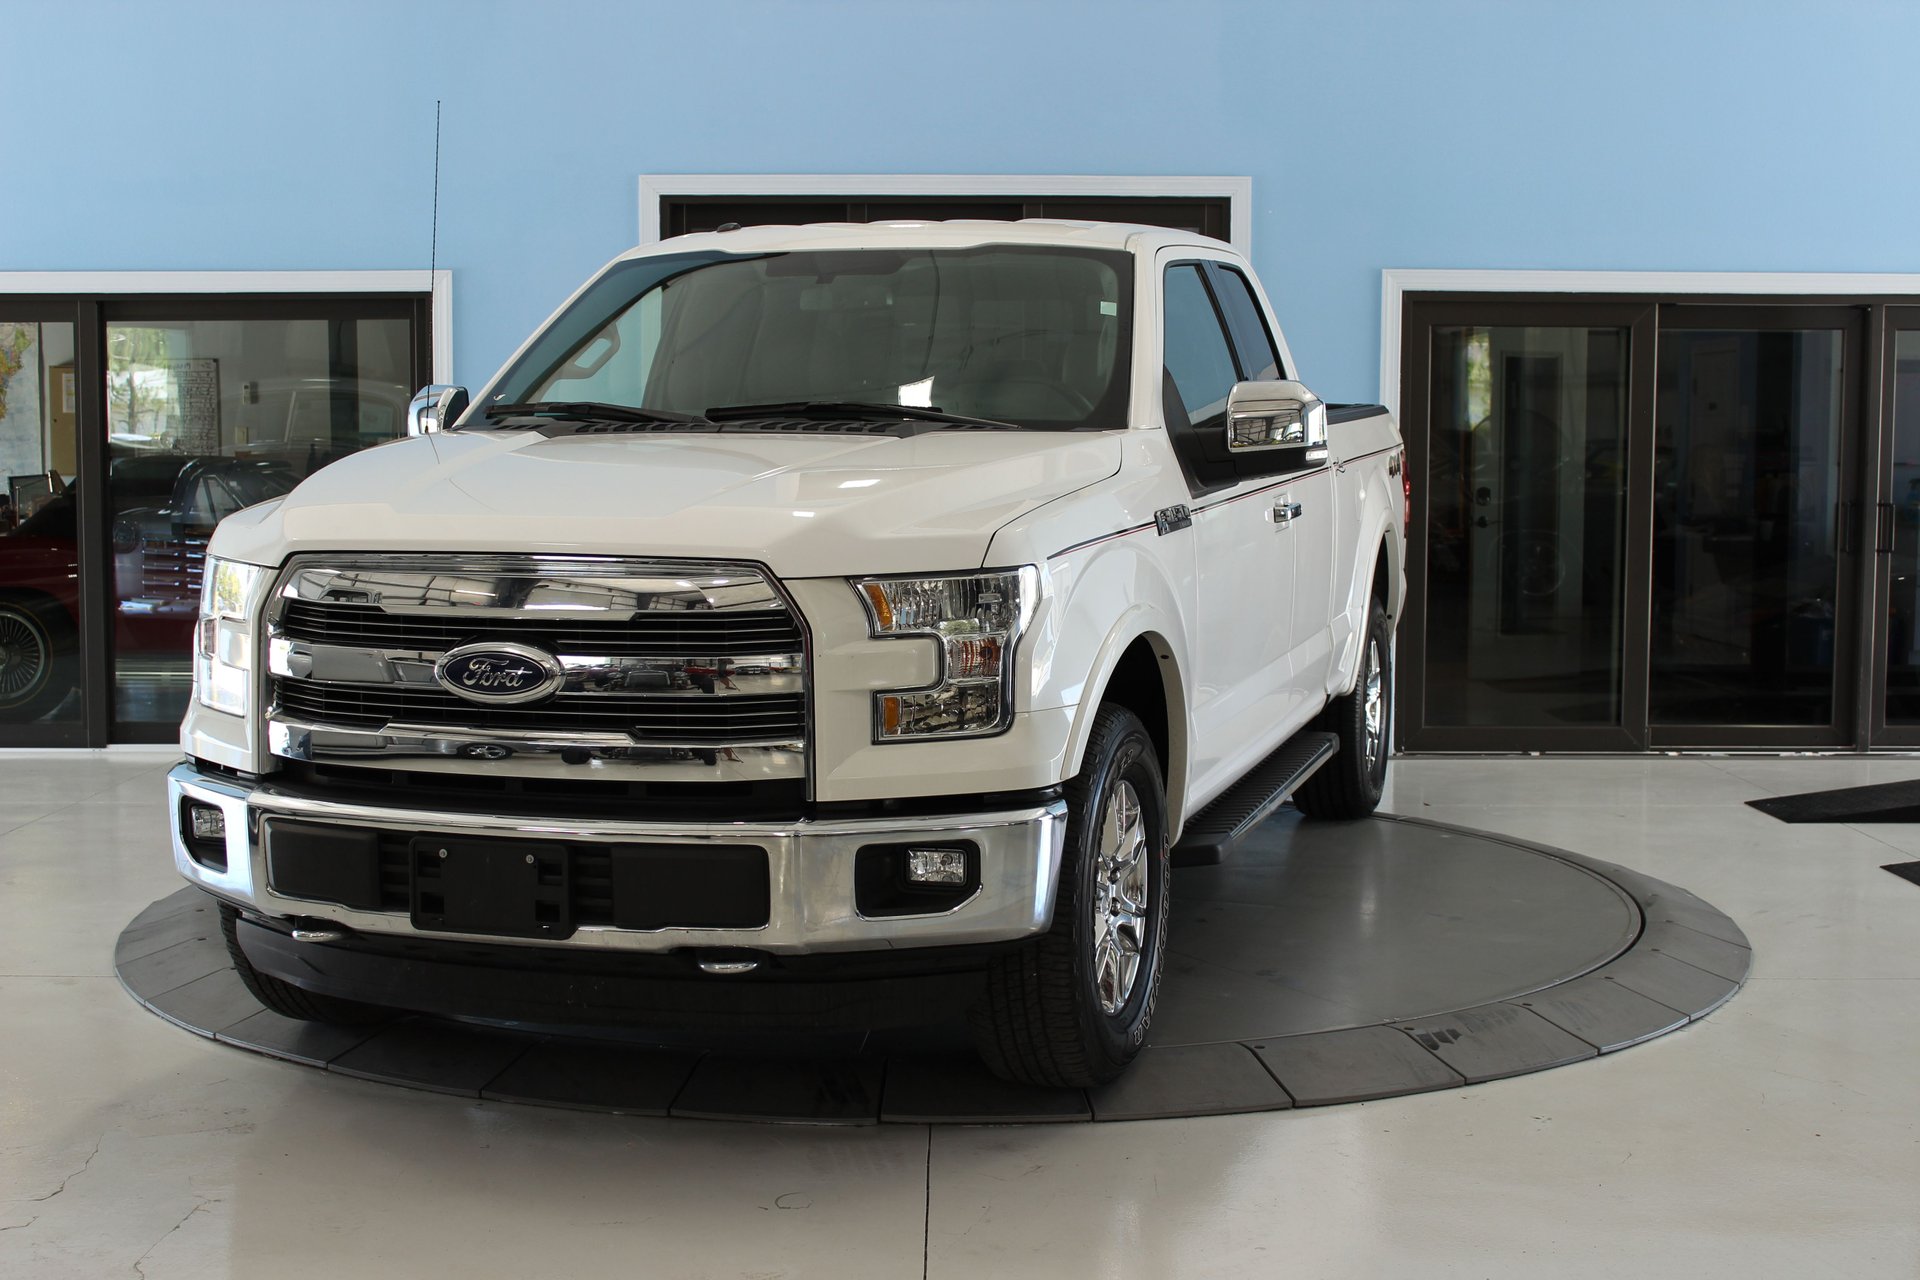 2015 Ford F-150 | Classic Cars & Used Cars For Sale in Tampa, FL 2015 Ford F 150 Lariat 5.0 Towing Capacity